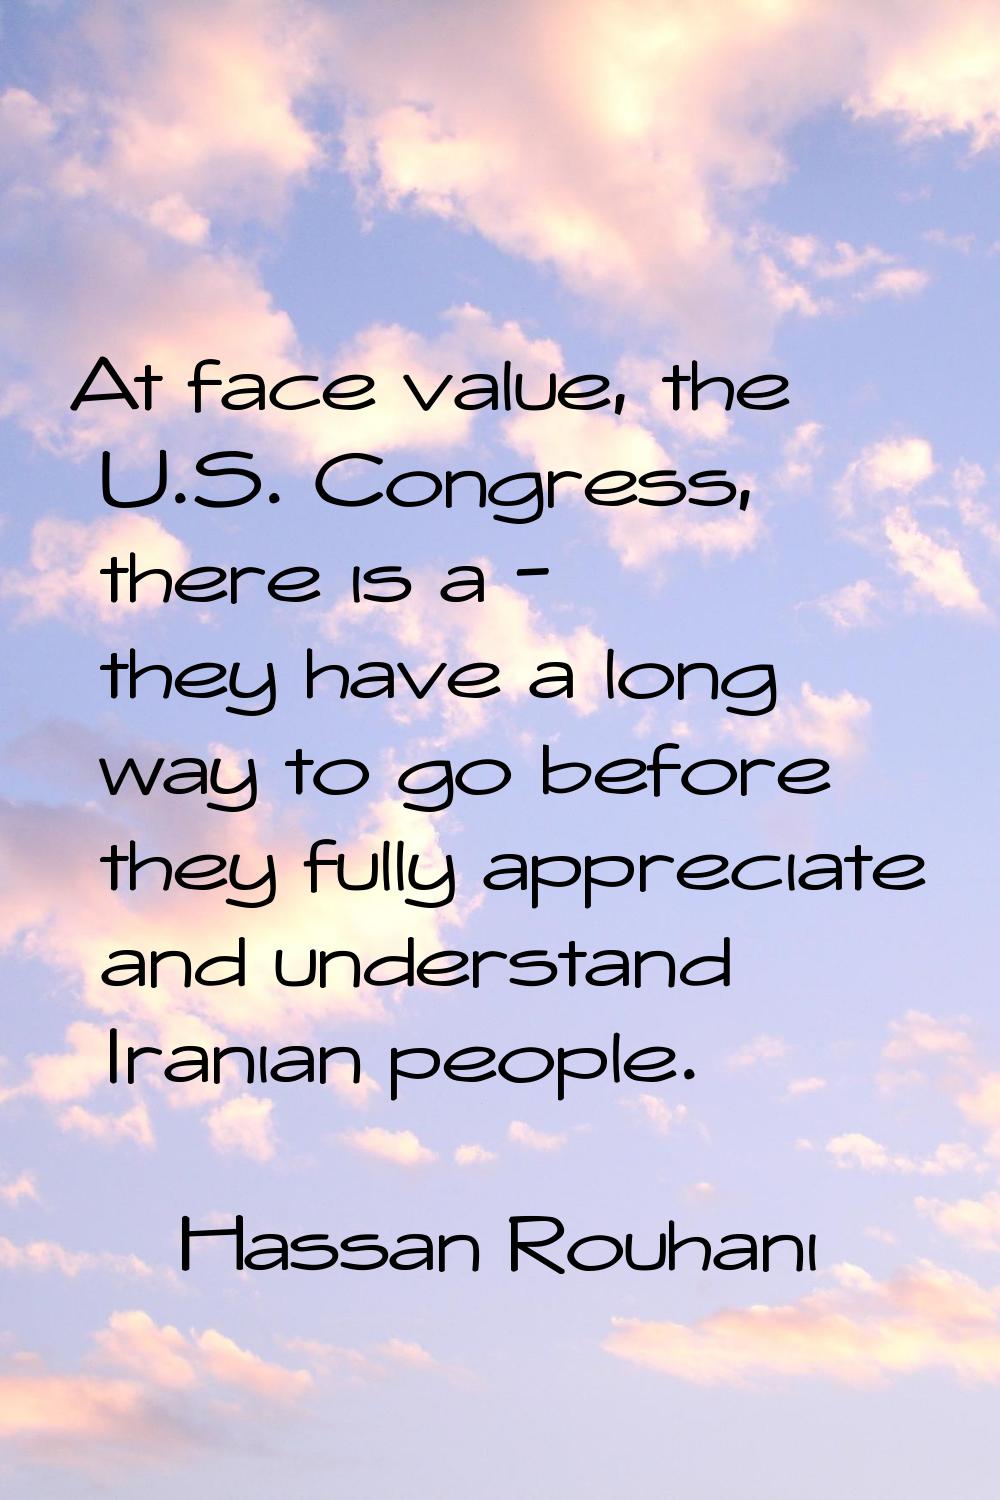 At face value, the U.S. Congress, there is a - they have a long way to go before they fully appreci